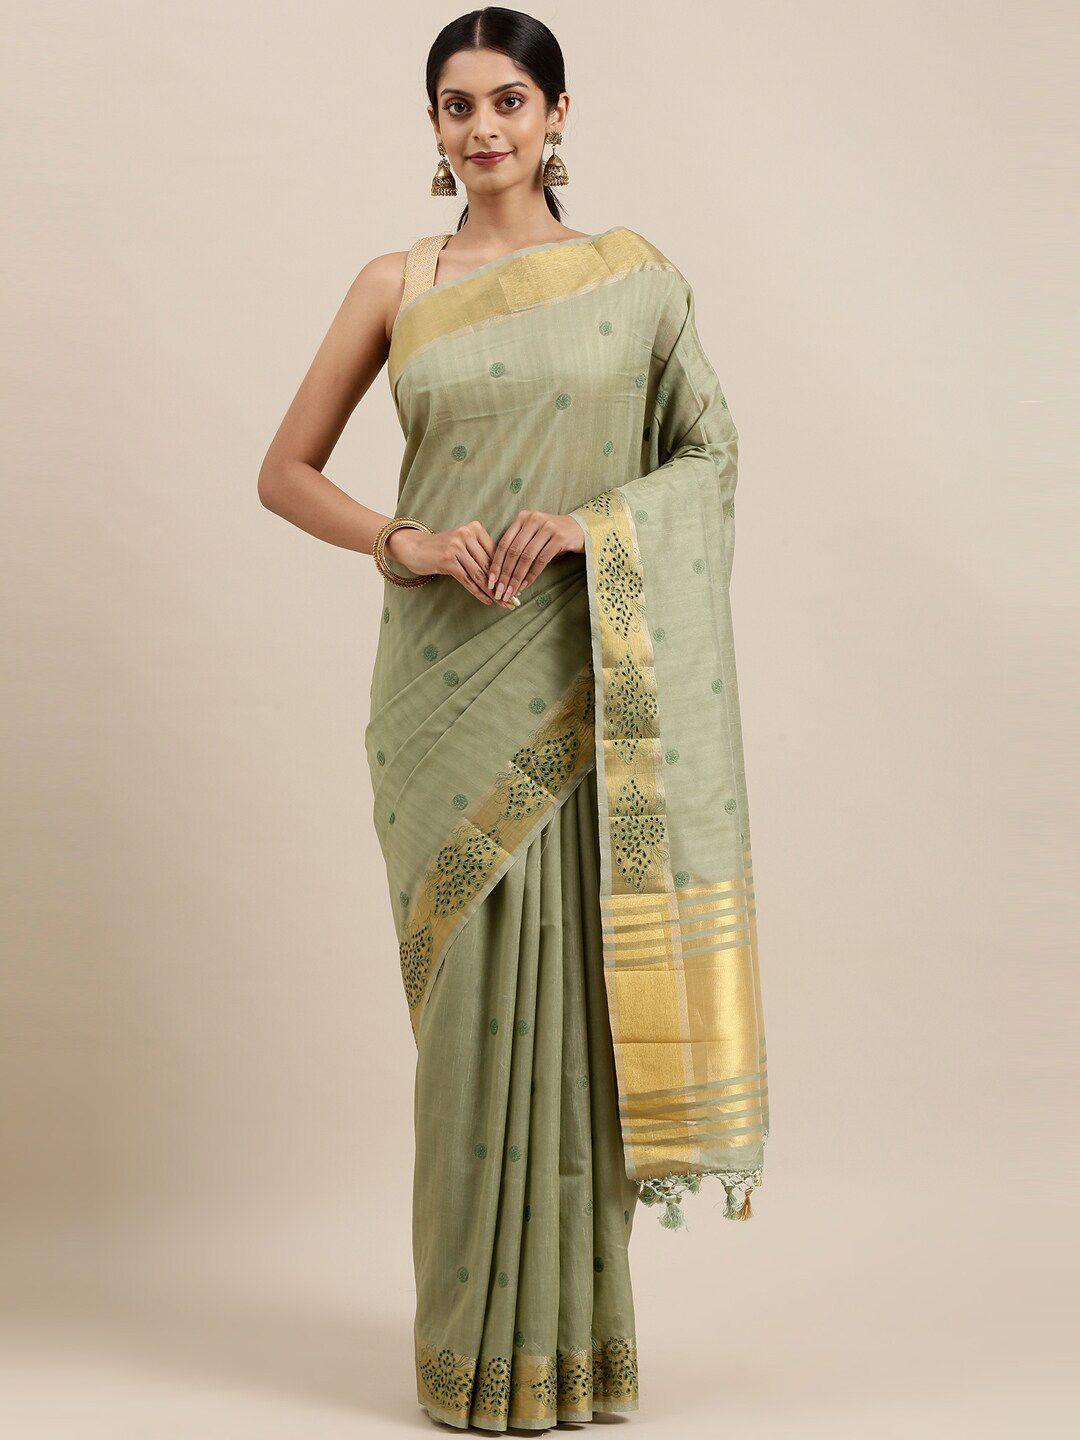 the chennai silks green & gold-toned ethnic motifs embroidered saree